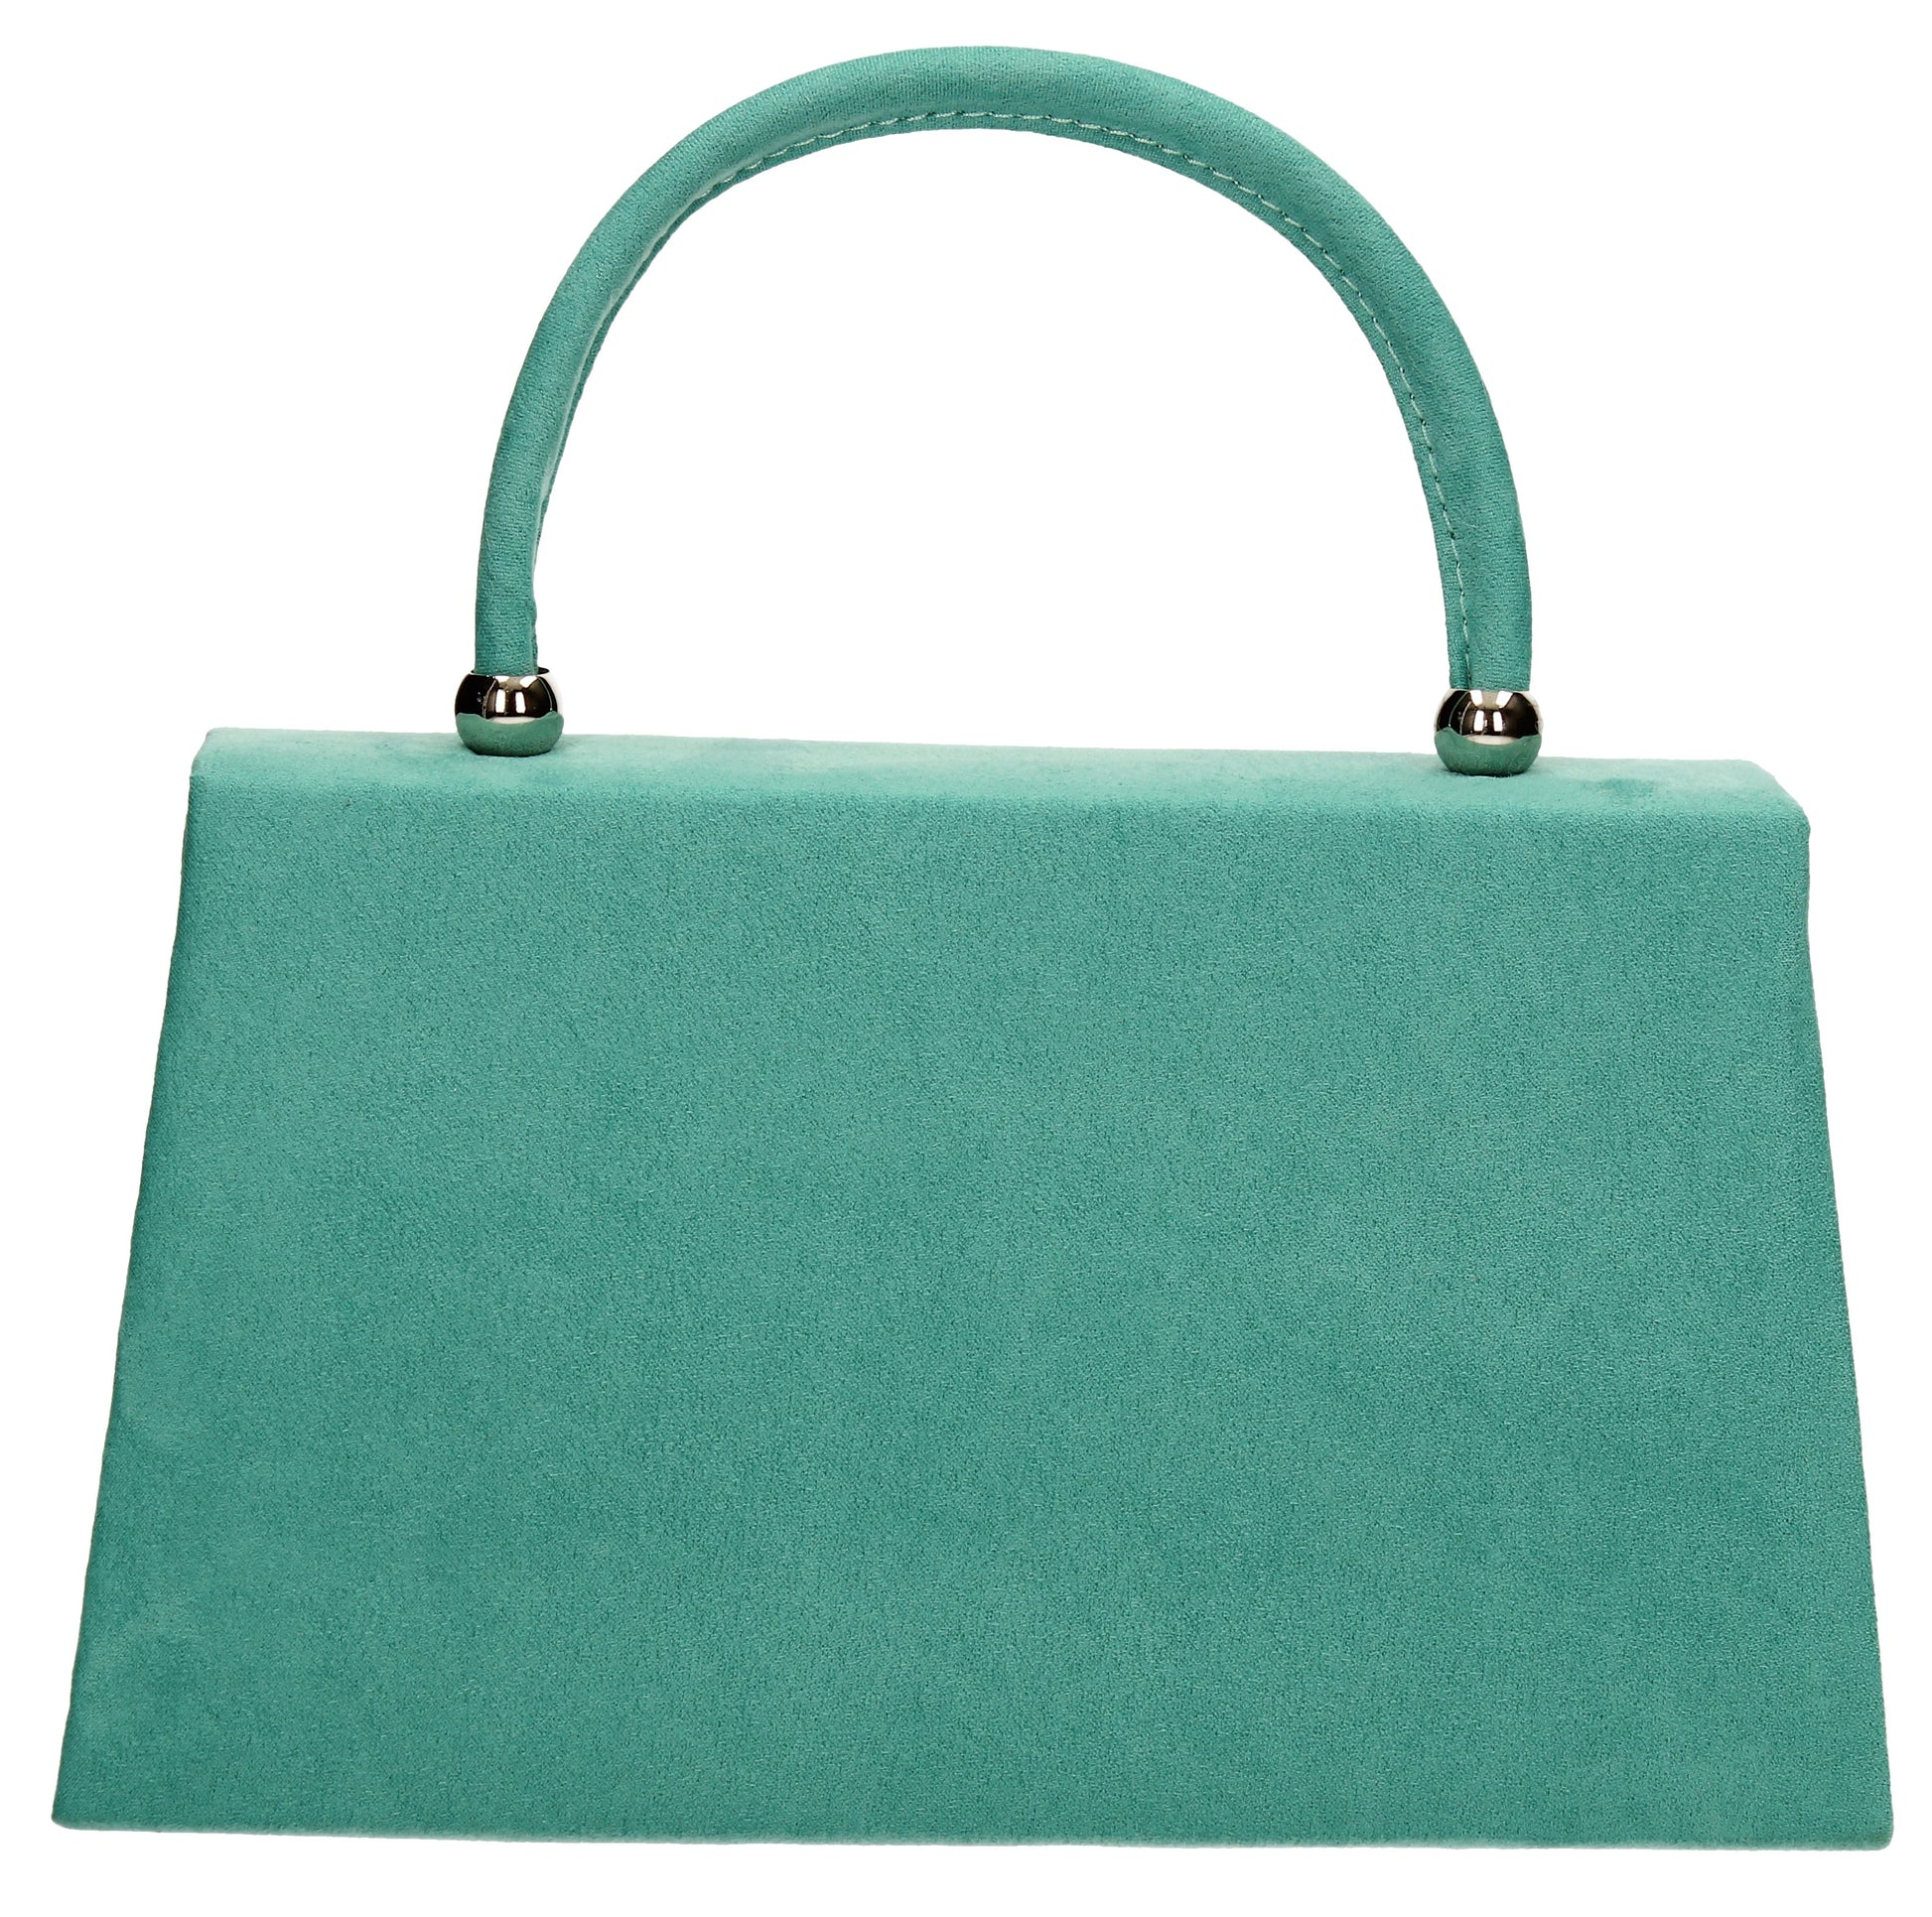 SWANKYSWANS Kendall Faux Suede Clutch Bag Turquoise Cute Cheap Clutch Bag For Weddings School and Work